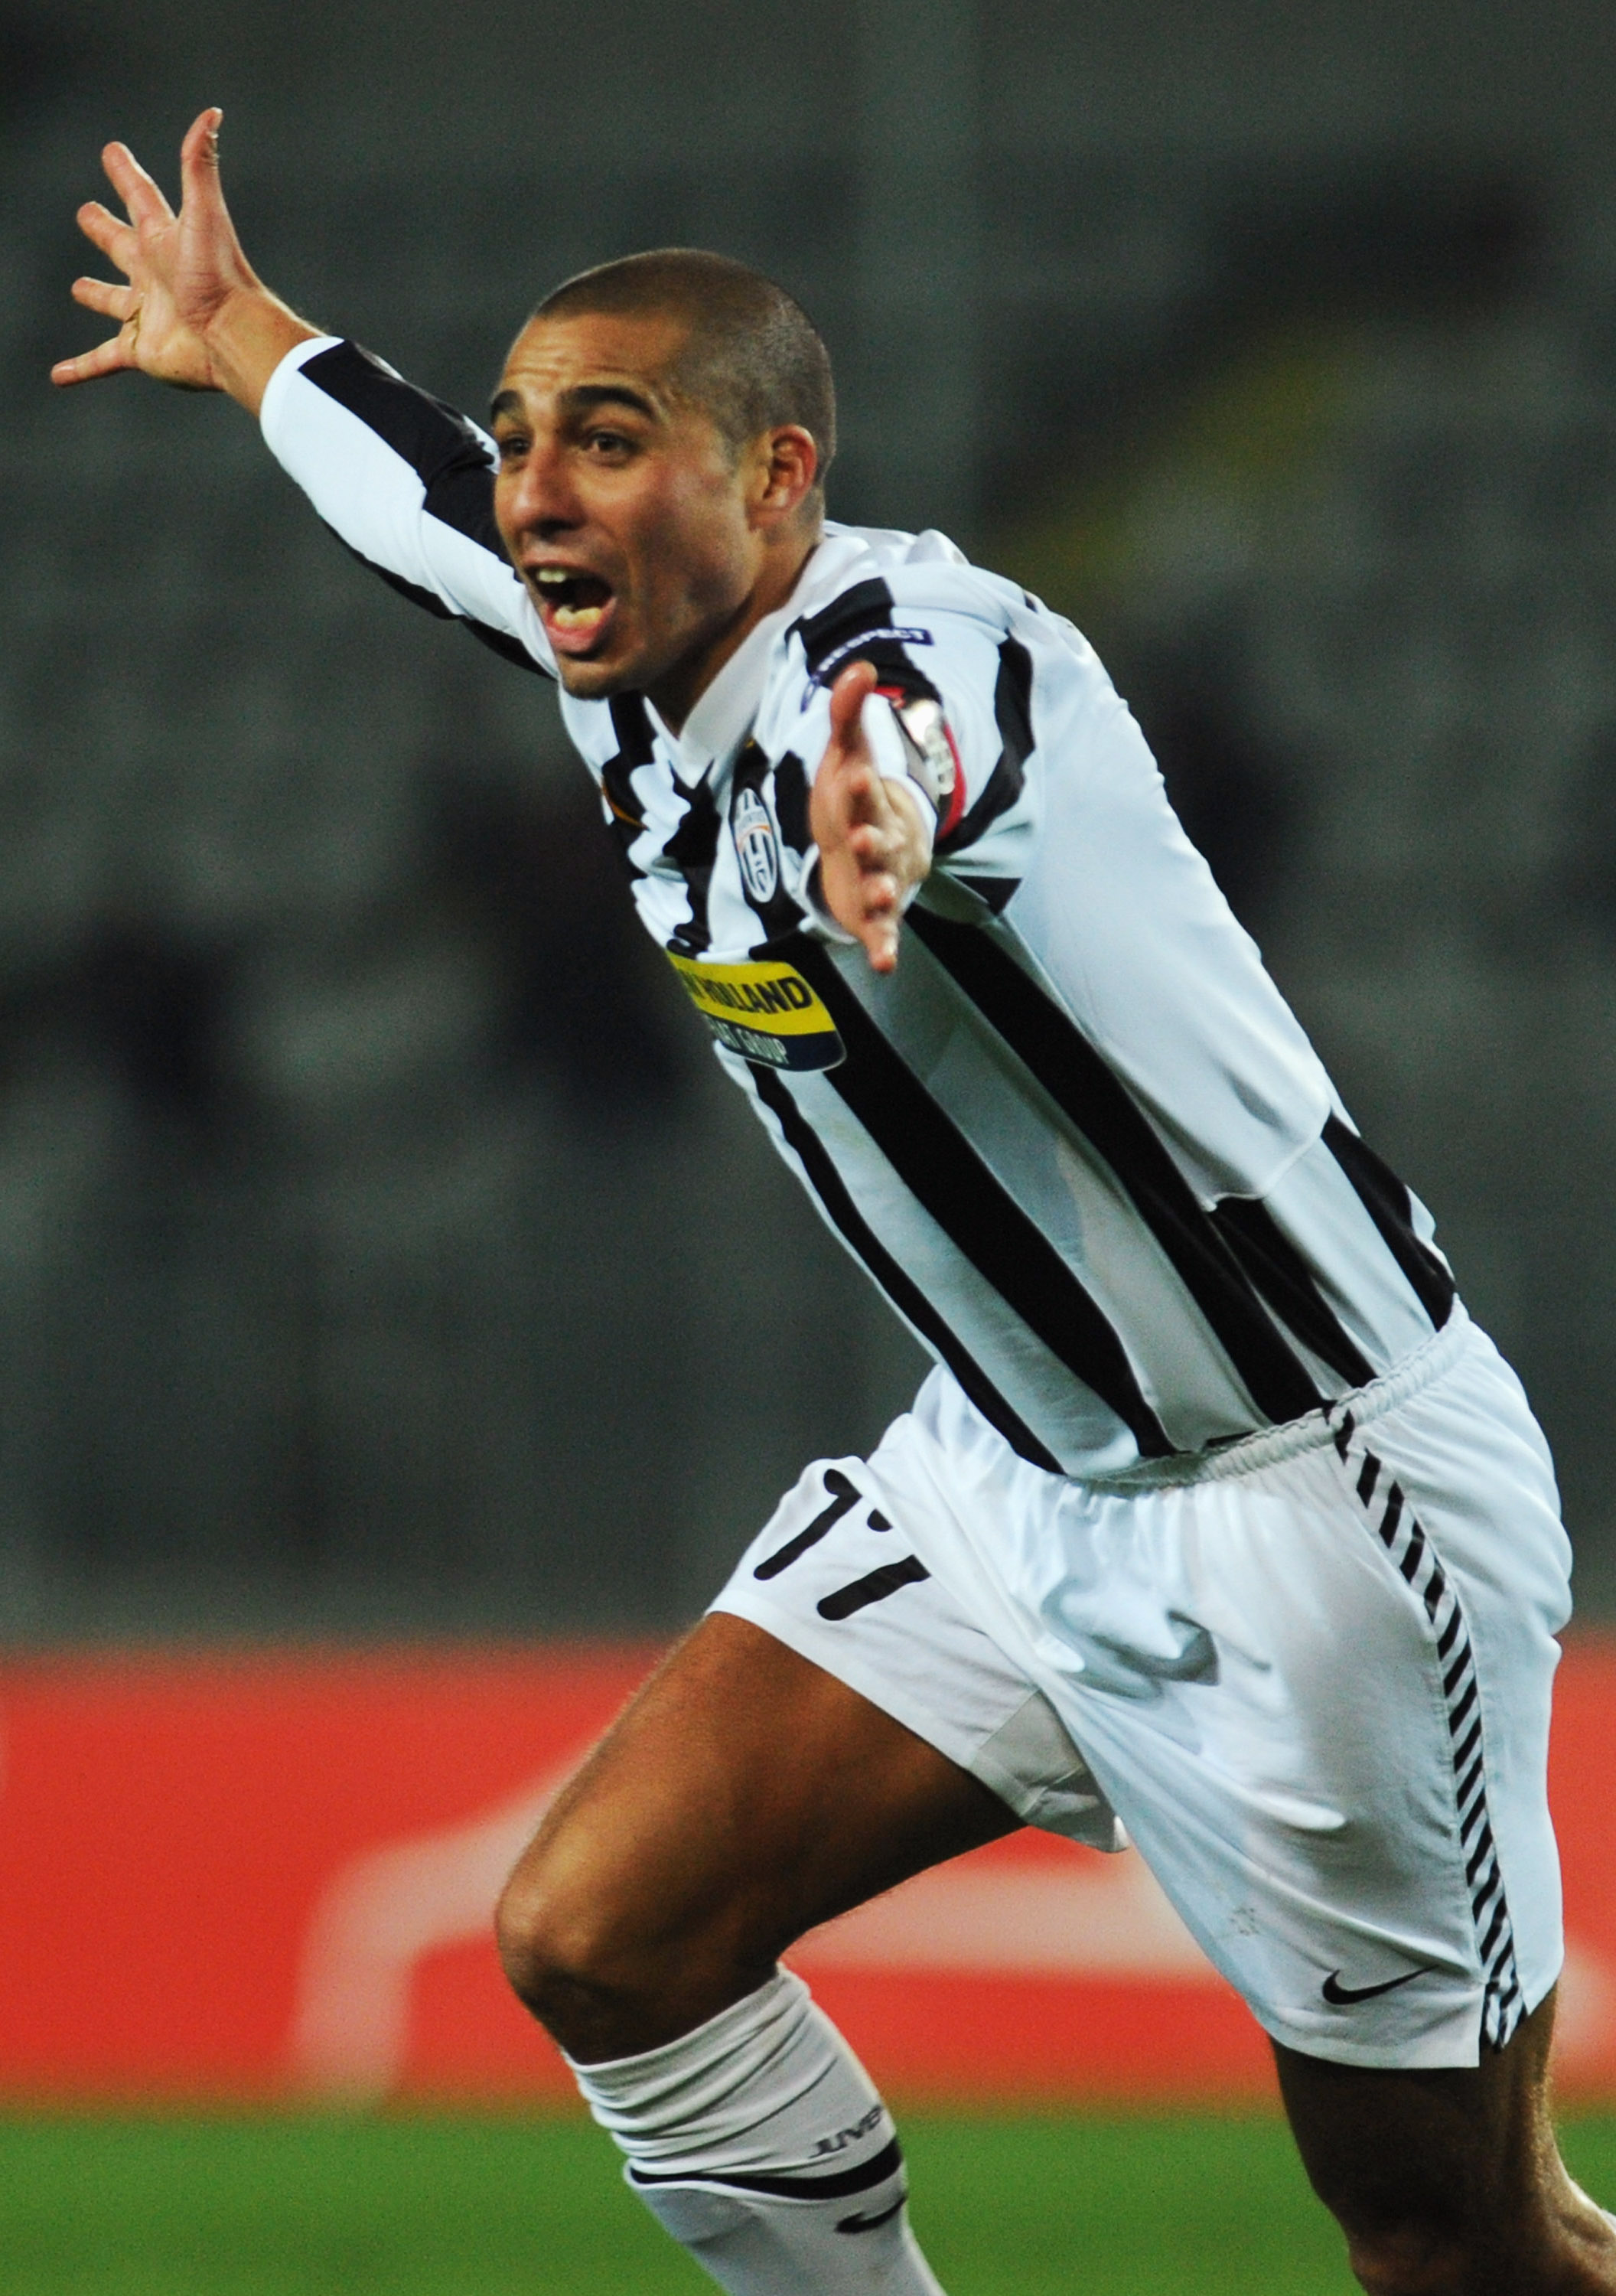 TURIN, ITALY - MARCH 11:  David Trezeguet of Juventus FC celebrates his goal during the UEFA Europa League last 16, first leg match between Juventus FC and Fulham FC on March 11, 2010 in Turin, Italy.  (Photo by Valerio Pennicino/Getty Images)